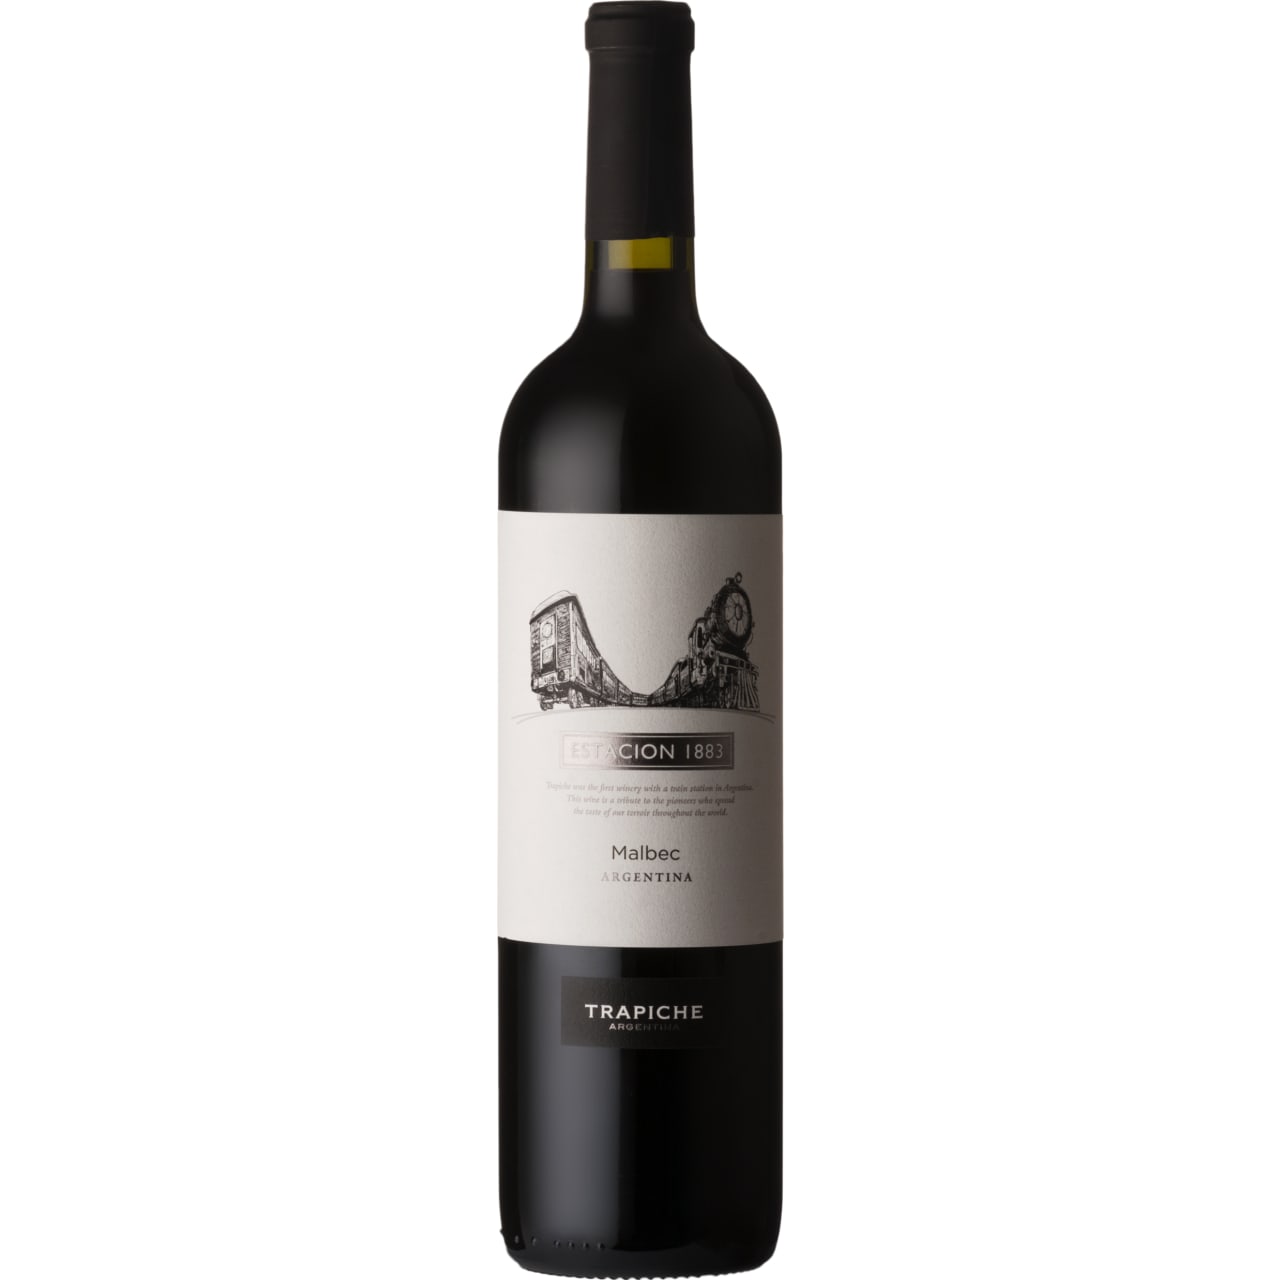 Seamless, velvety Malbec, with vibrant notes of ripe red fruit, cherries and violets with an underlying mineral character and an elegant finish.